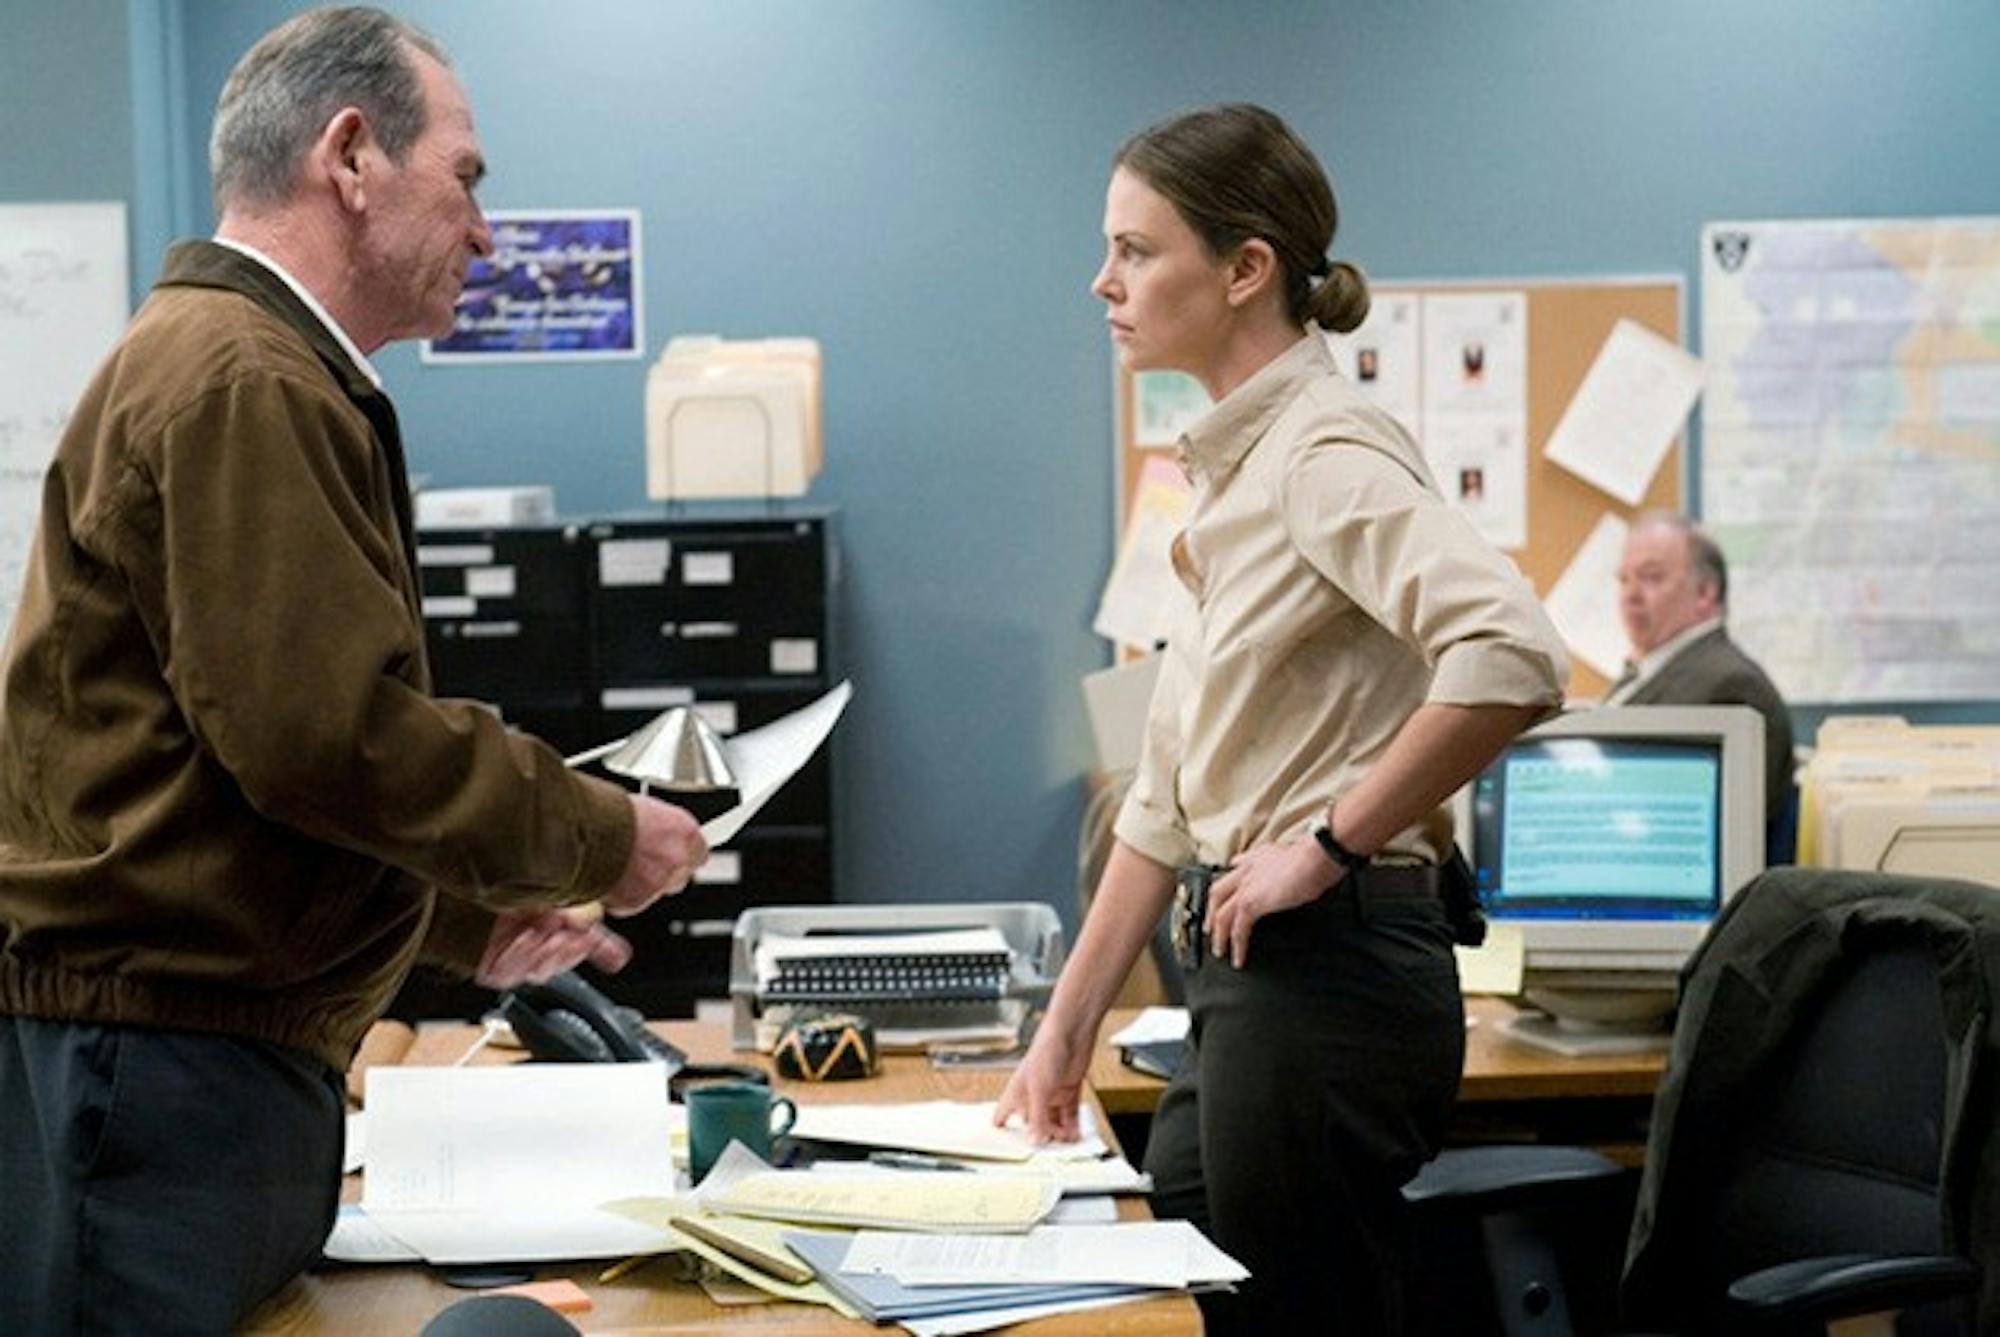 Academy Award winners Tommy Lee Jones and Charlize Theron star in director Paul Haggis' 